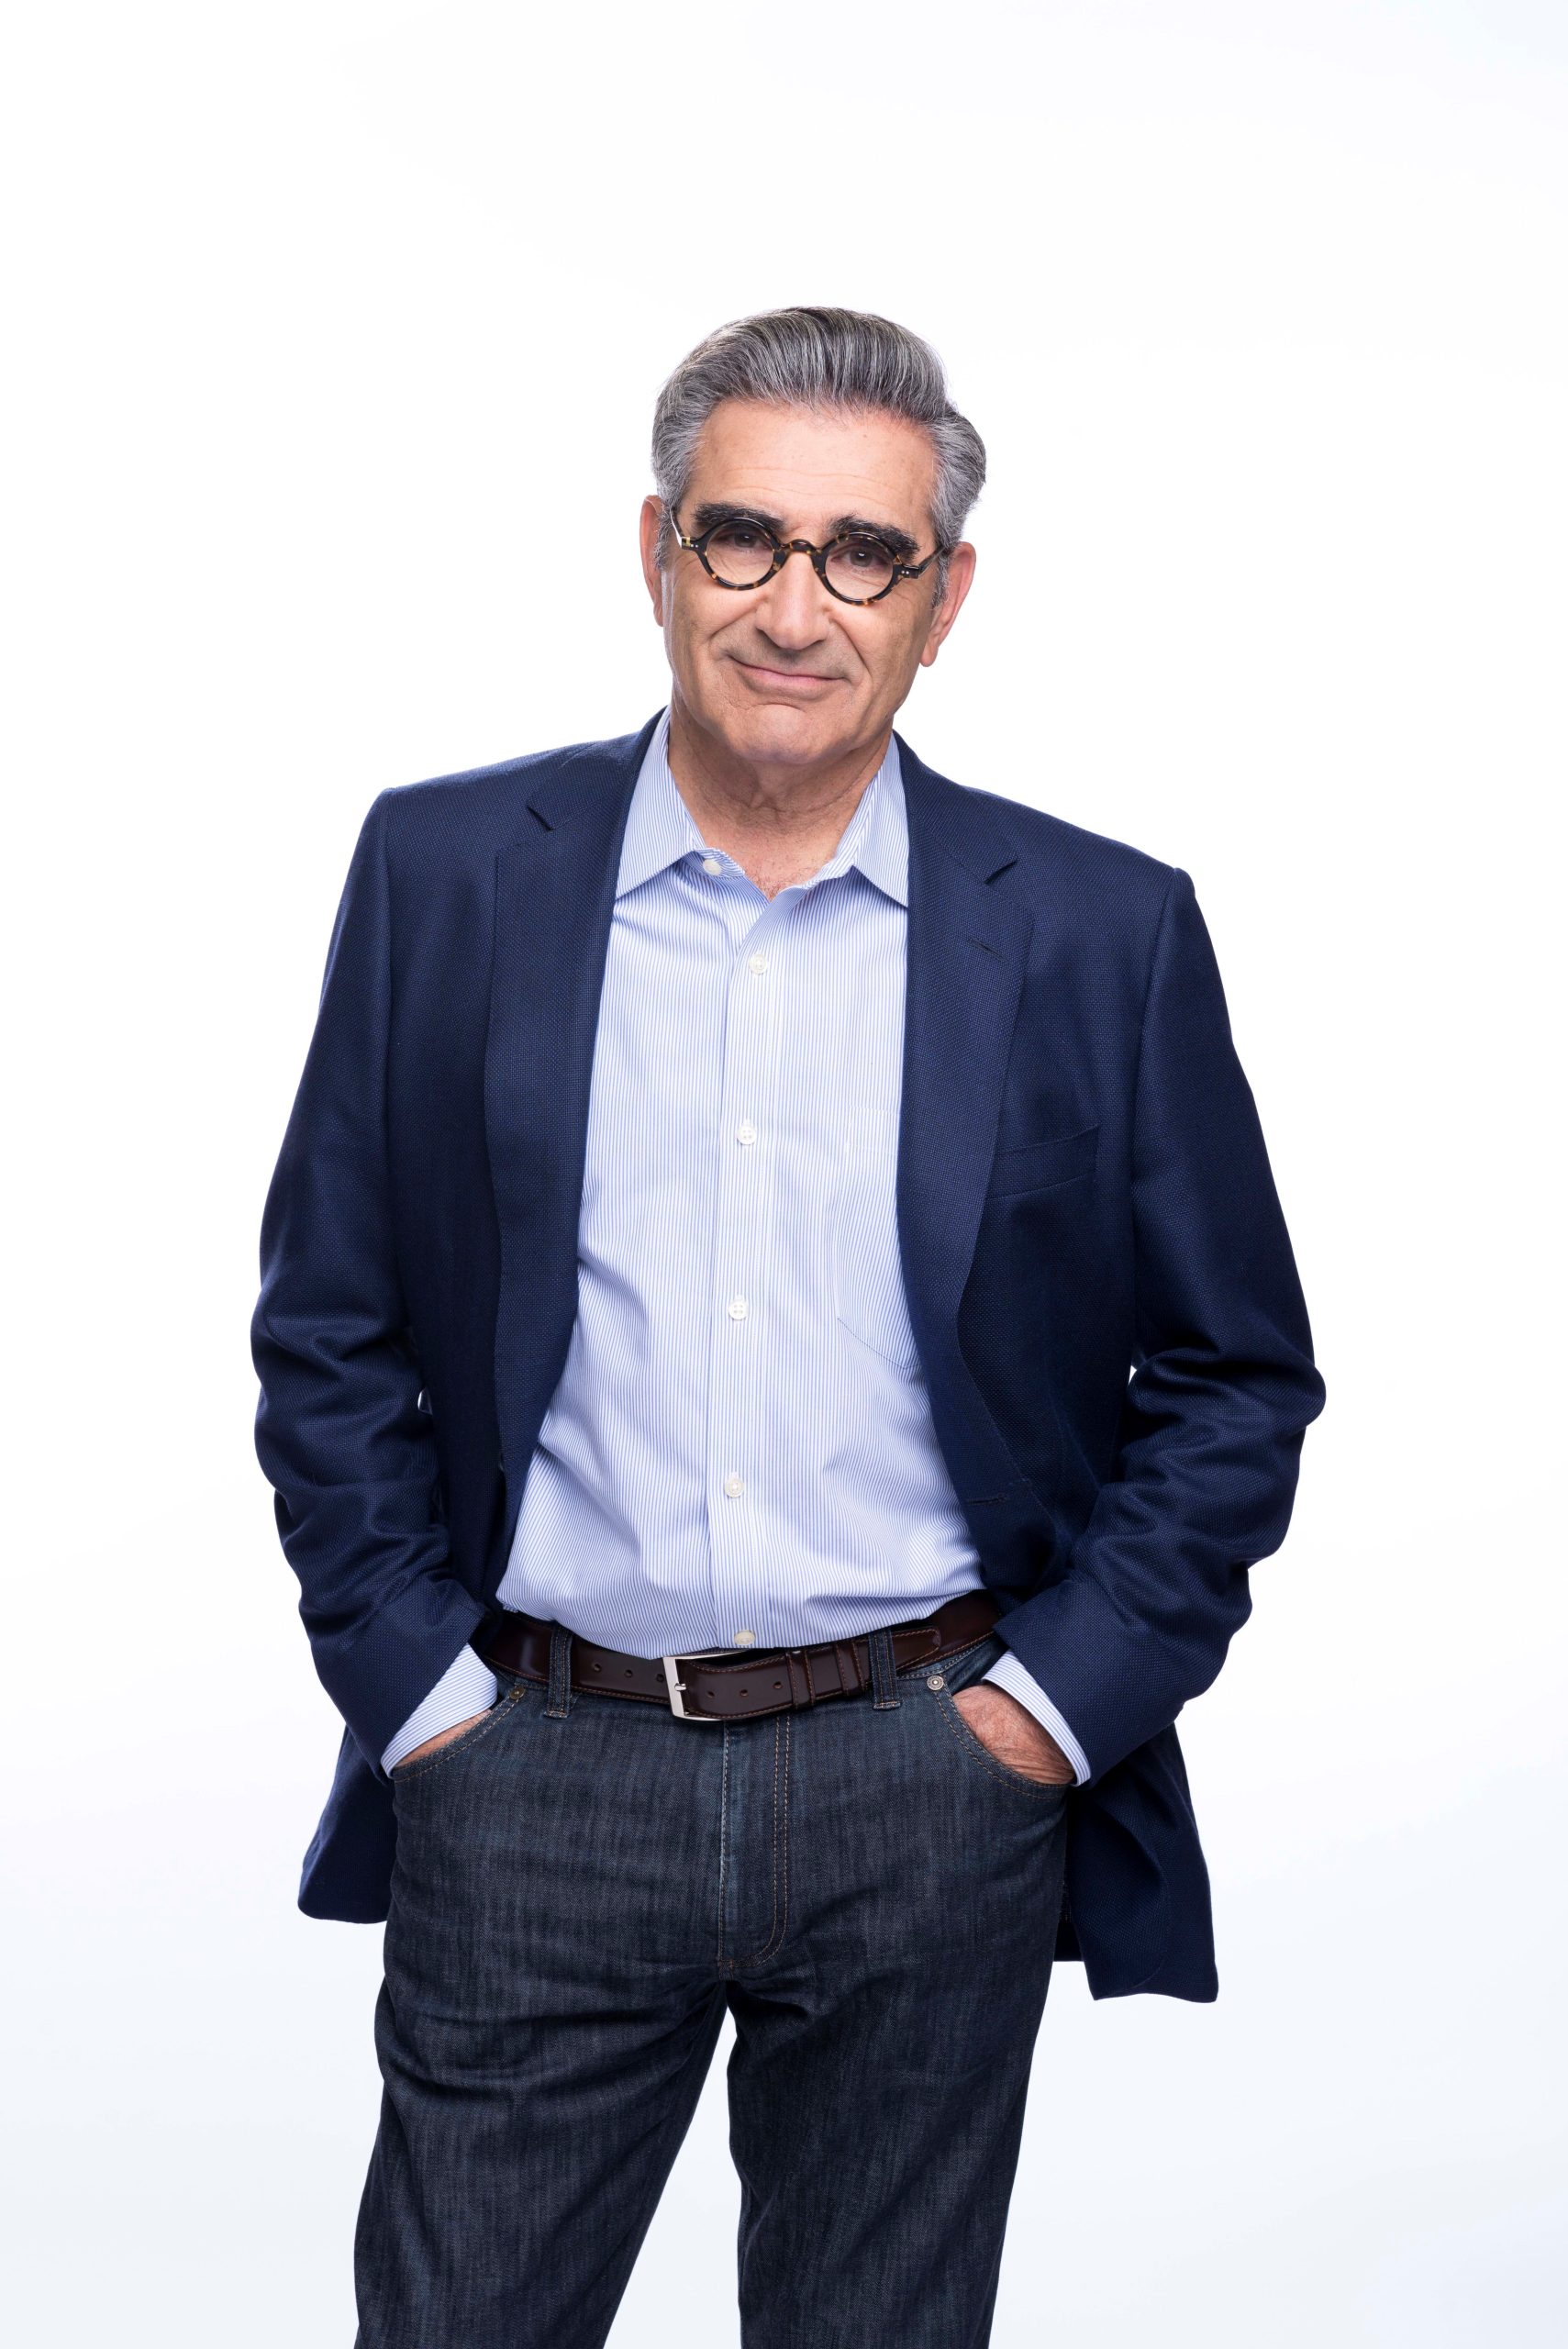 ACTOR EUGENE LEVY TO BE HONORED WITH STAR ON THE HOLLYWOOD WALK OF FAME